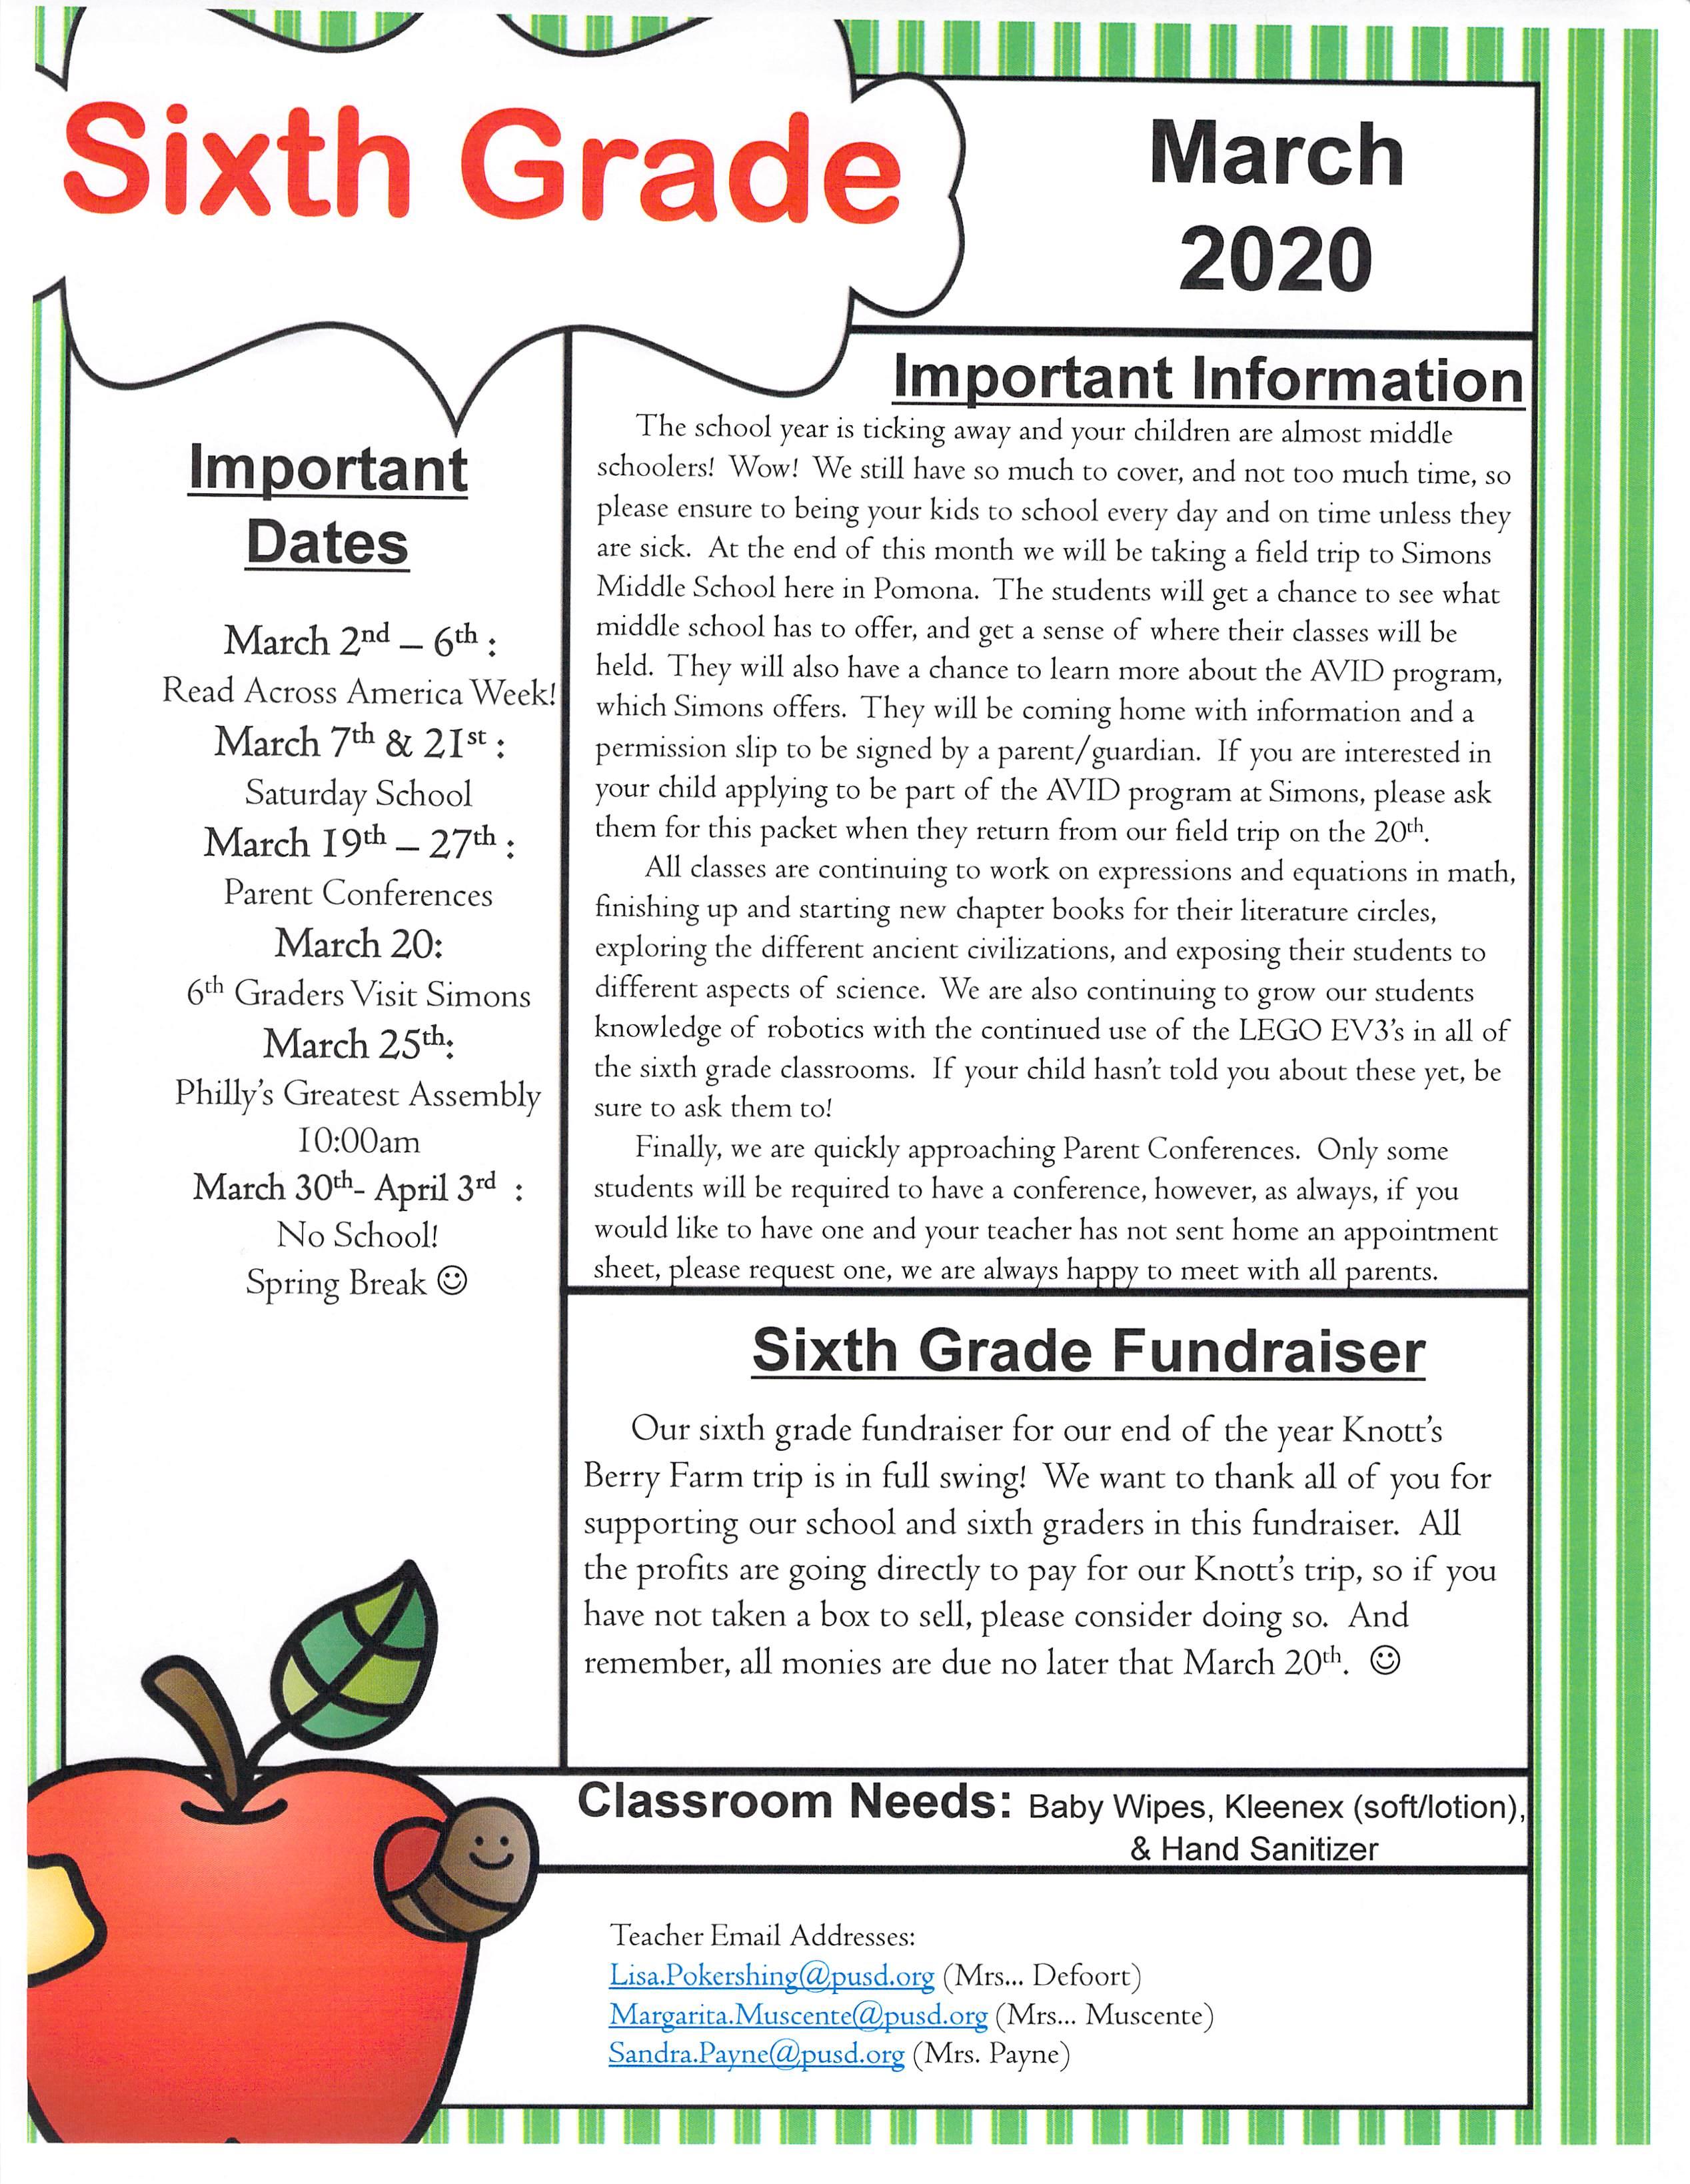 Please preview picture of newsletter, please see attached pdf